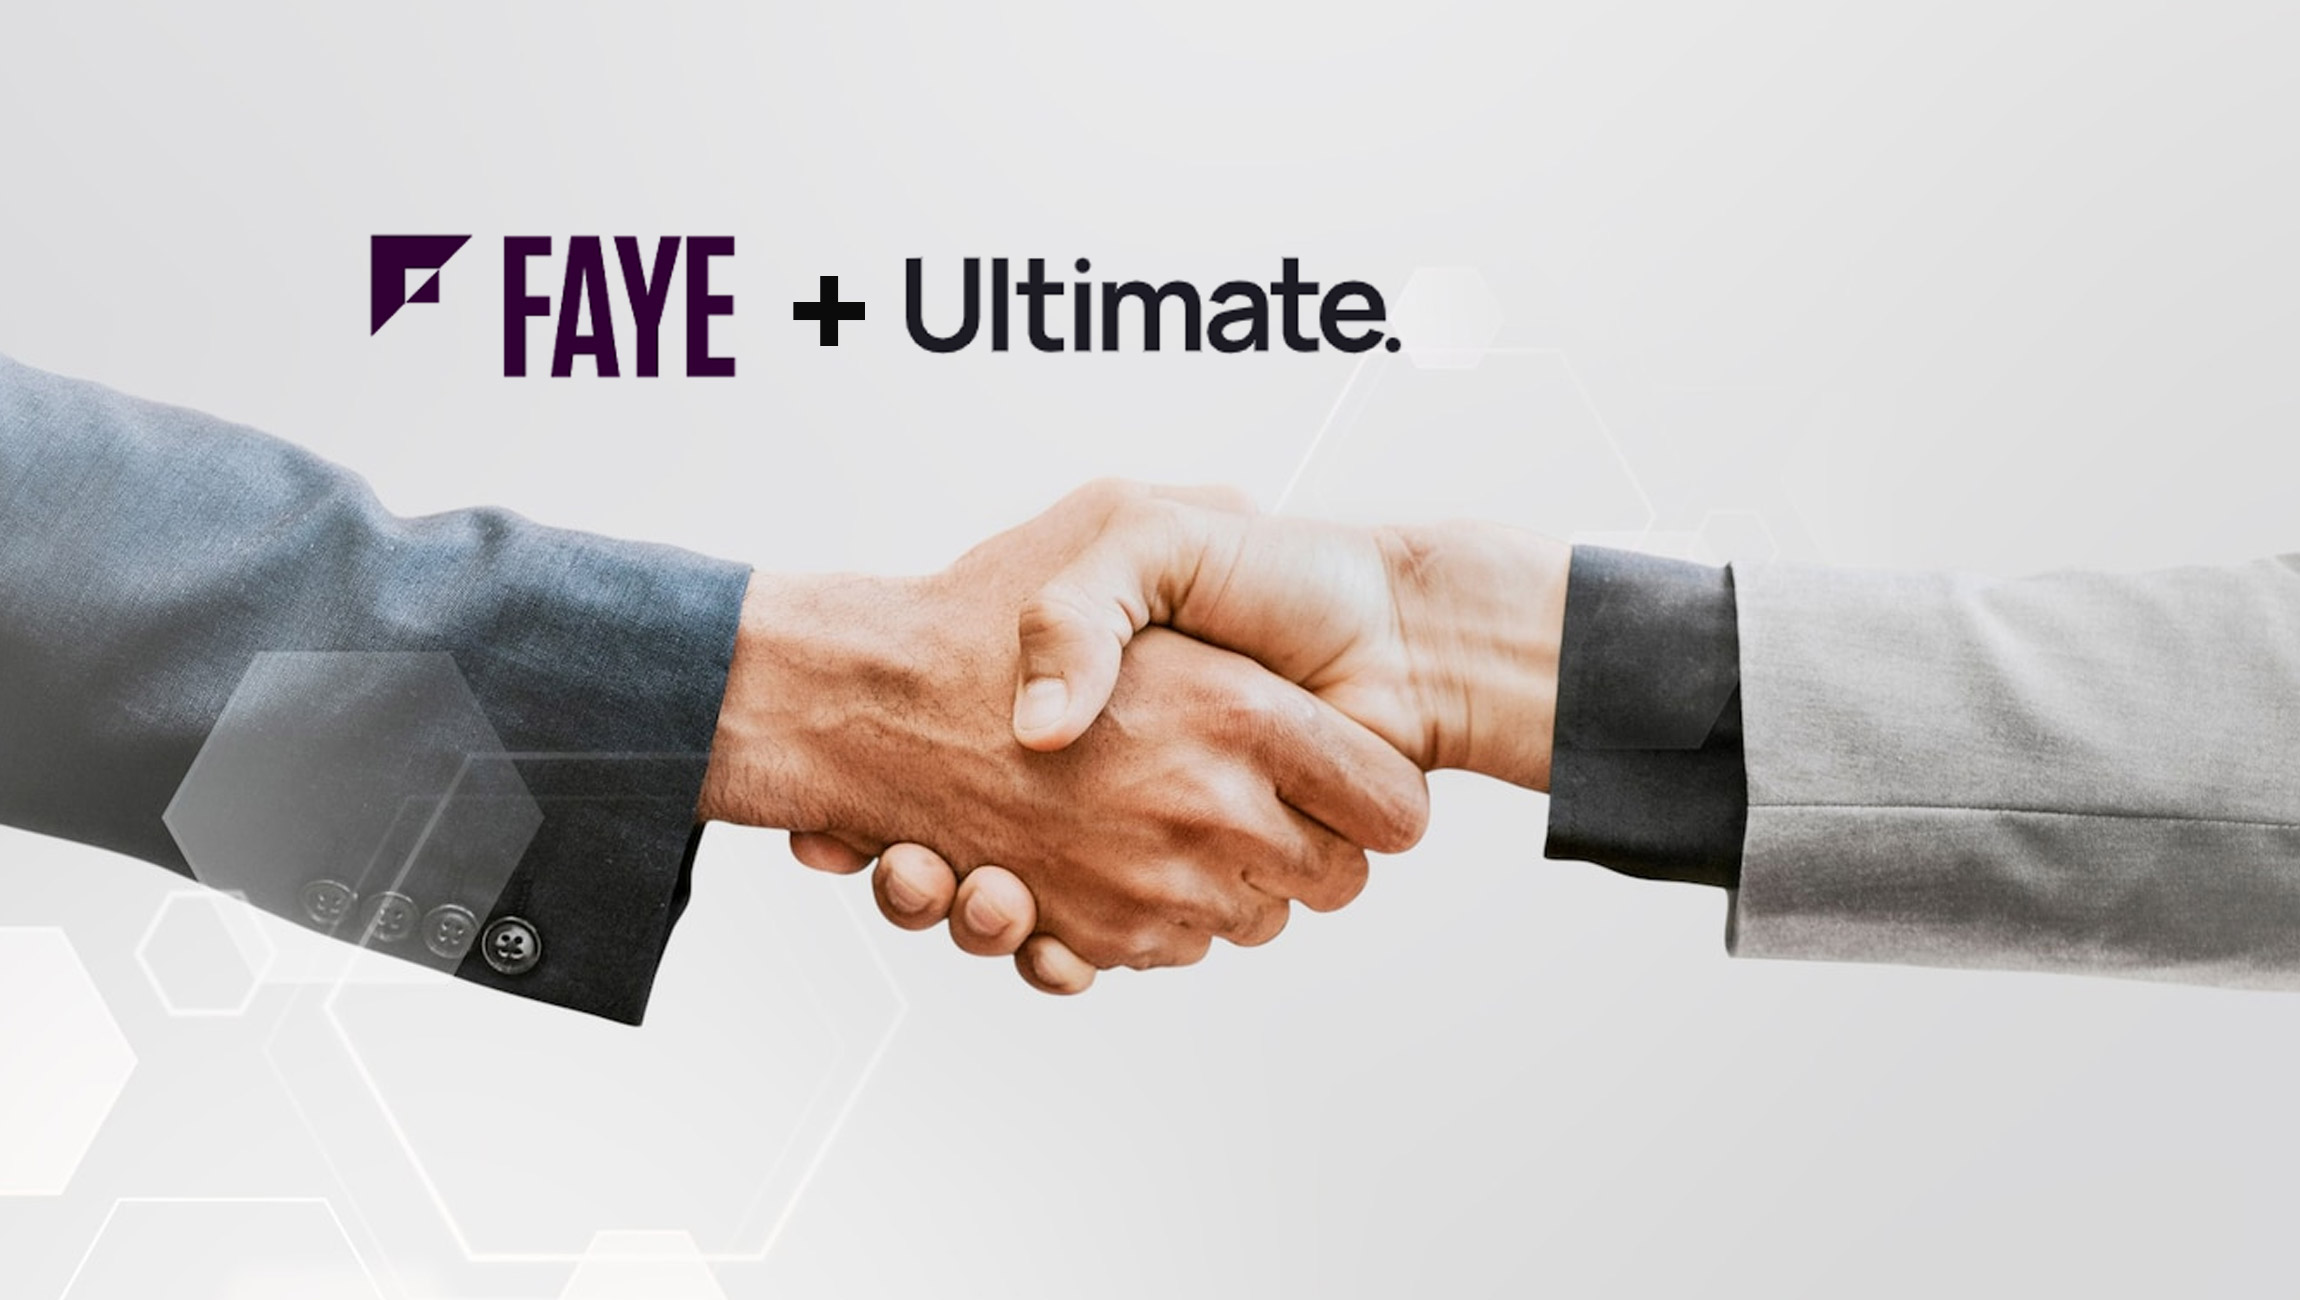 Faye and Ultimate Partner to Supercharge Customer Service Software